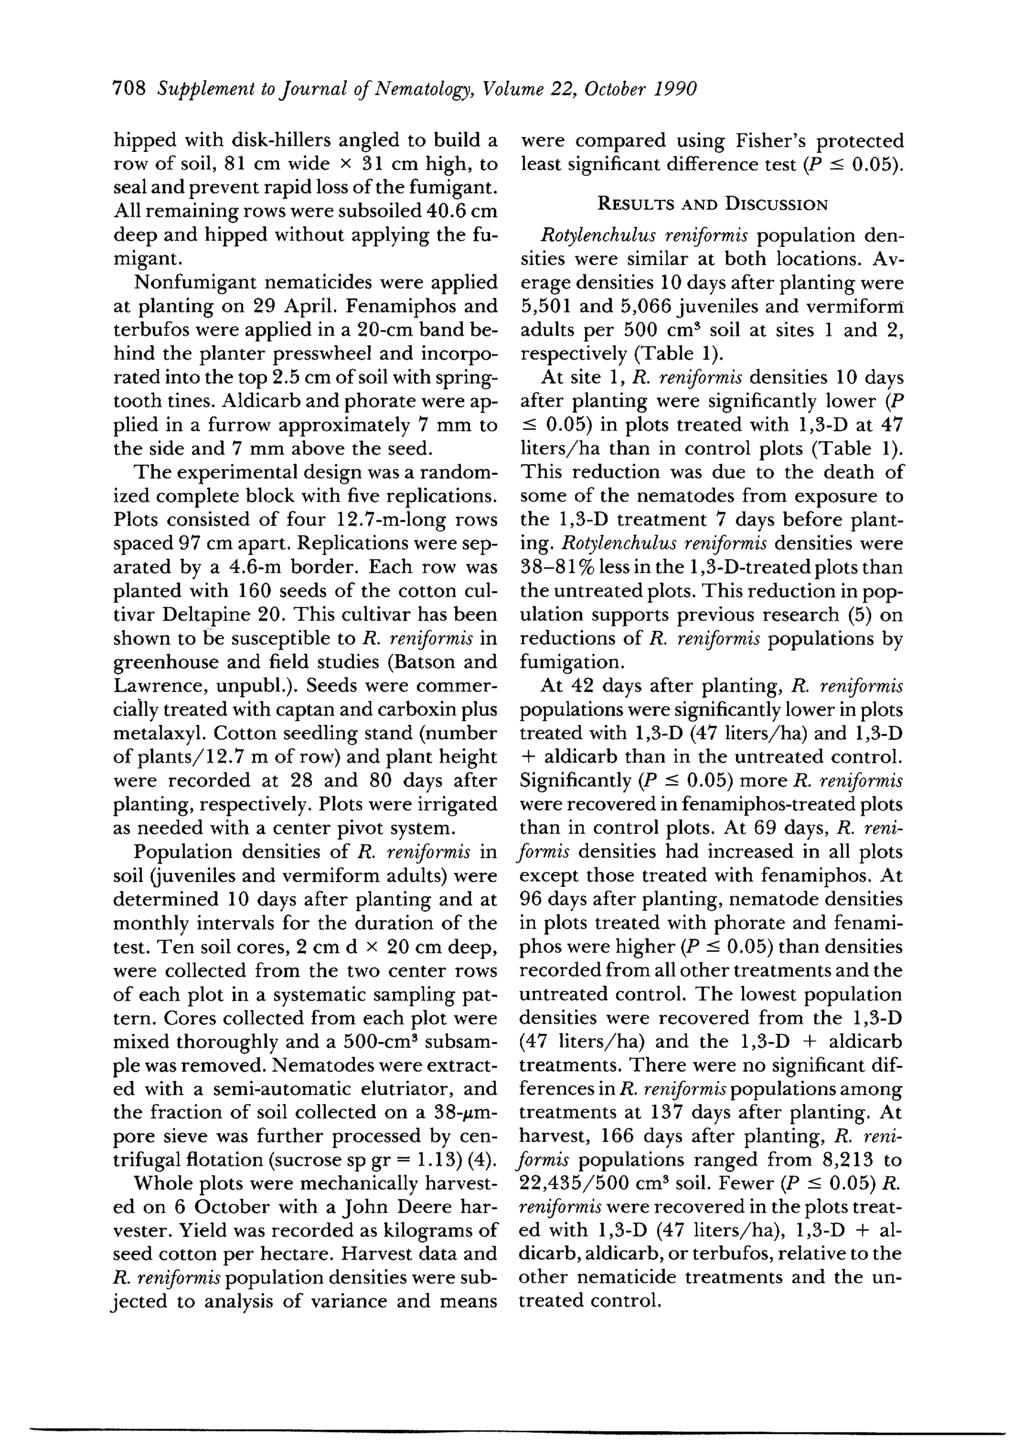 708 Supplement to Journal of ematology, Volume 22, October 1990 hipped with disk-hillers angled to build a row of soil, 81 cm wide x 31 cm high, to seal and prevent rapid loss of the fumigant.